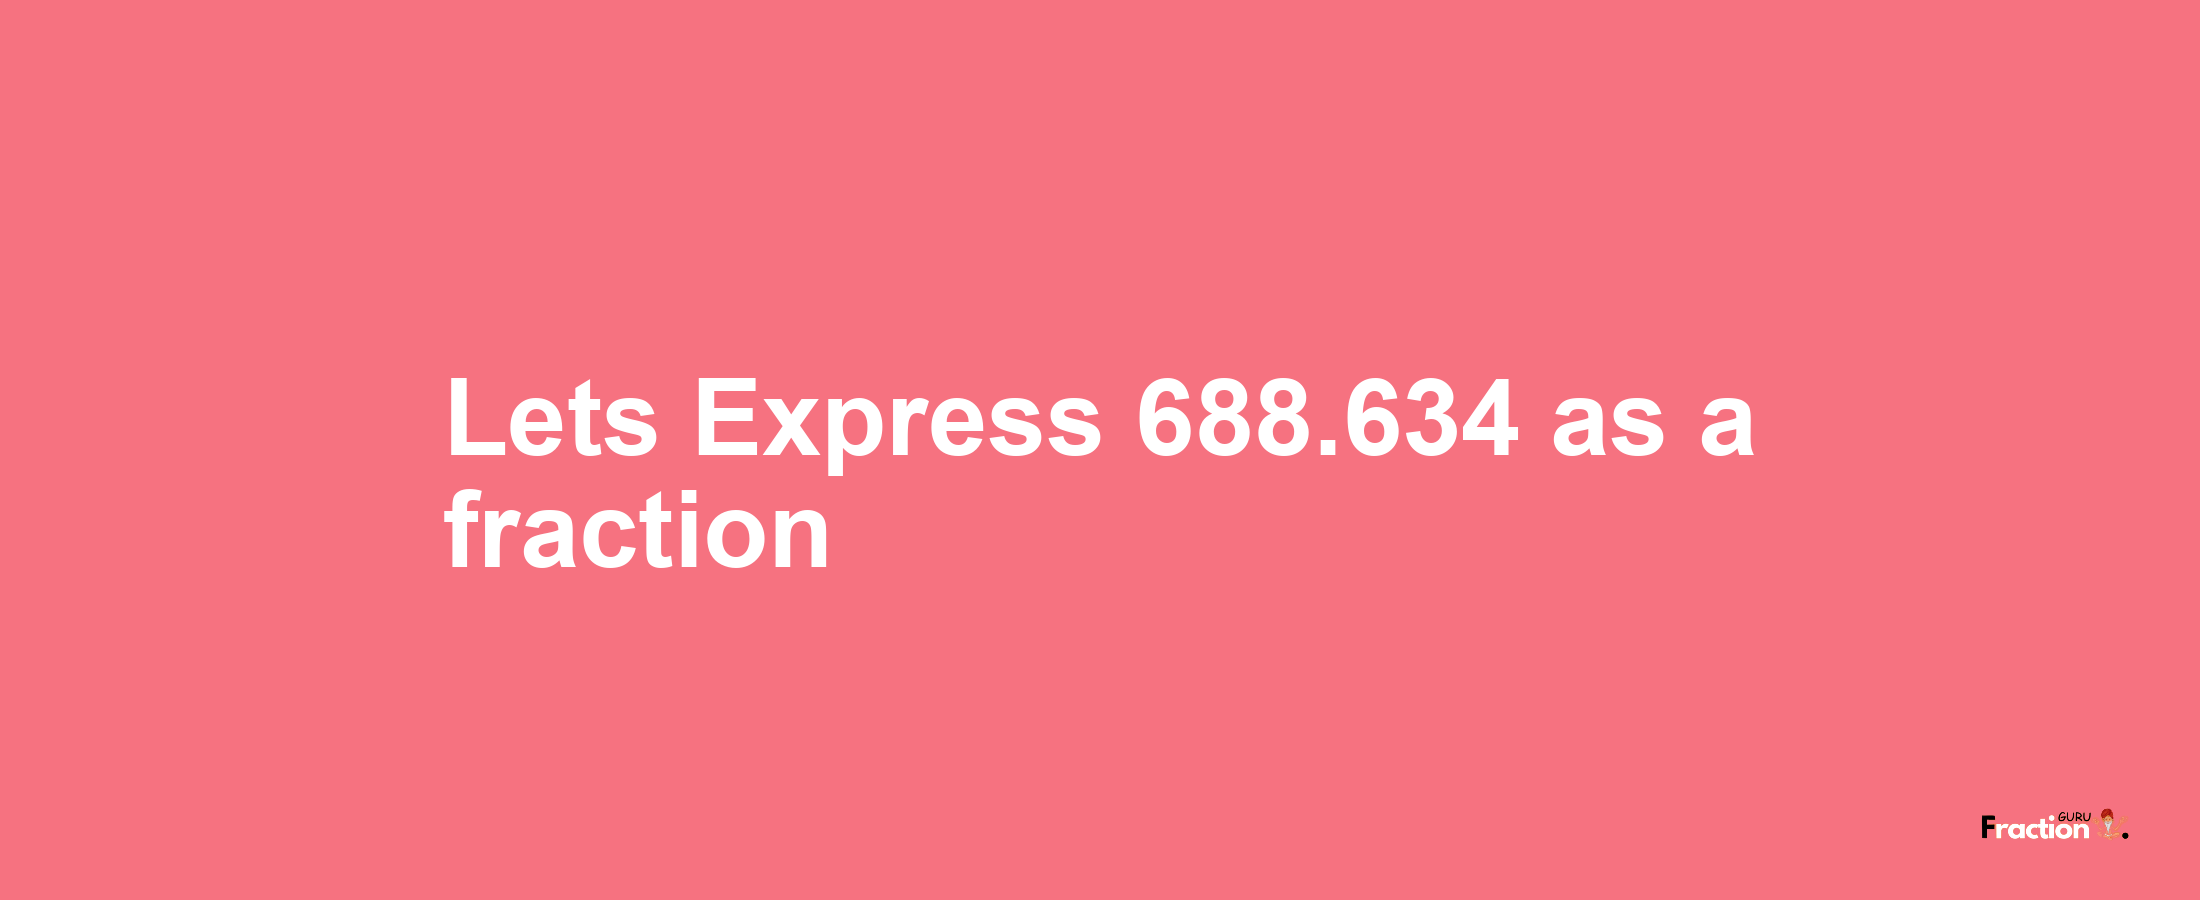 Lets Express 688.634 as afraction